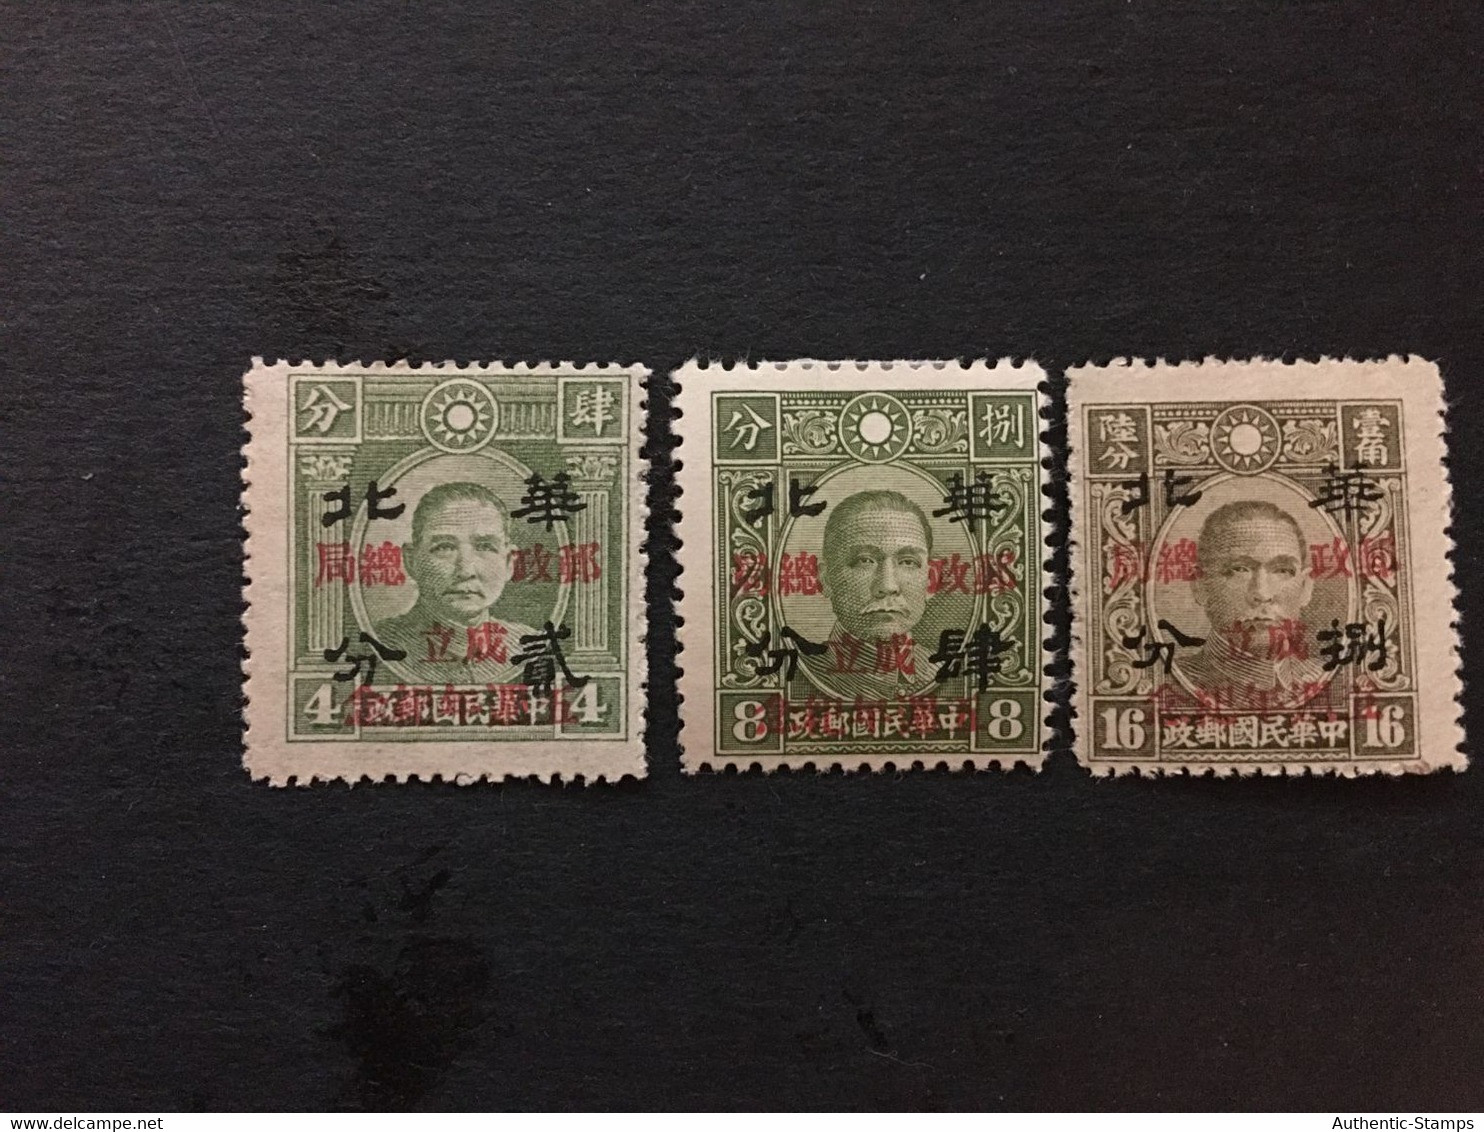 1943 CHINA  STAMP Set,5th Anniversary Of D.G Of Posts, Rare Overprint, Japanese Occupation, MLH, CINA, CHINE,  LIST 1067 - 1941-45 Northern China